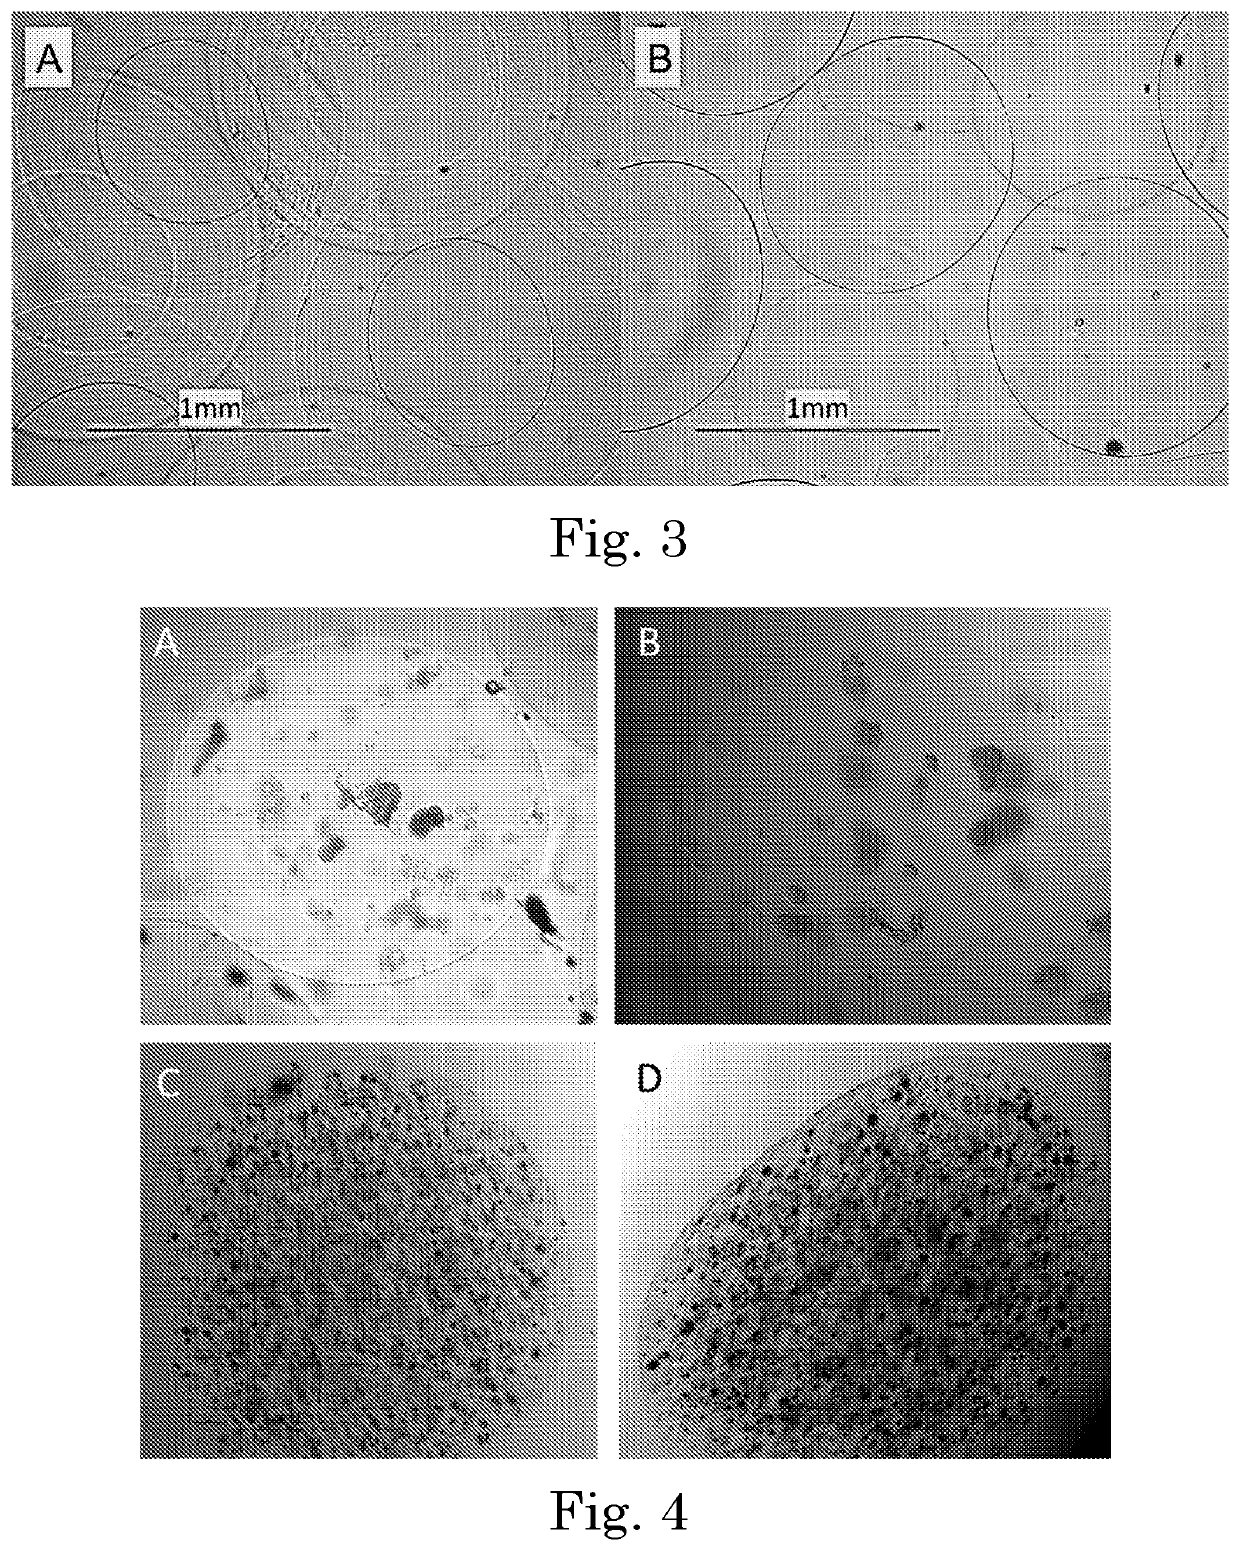 Tunable degradation in hydrogel microparticles